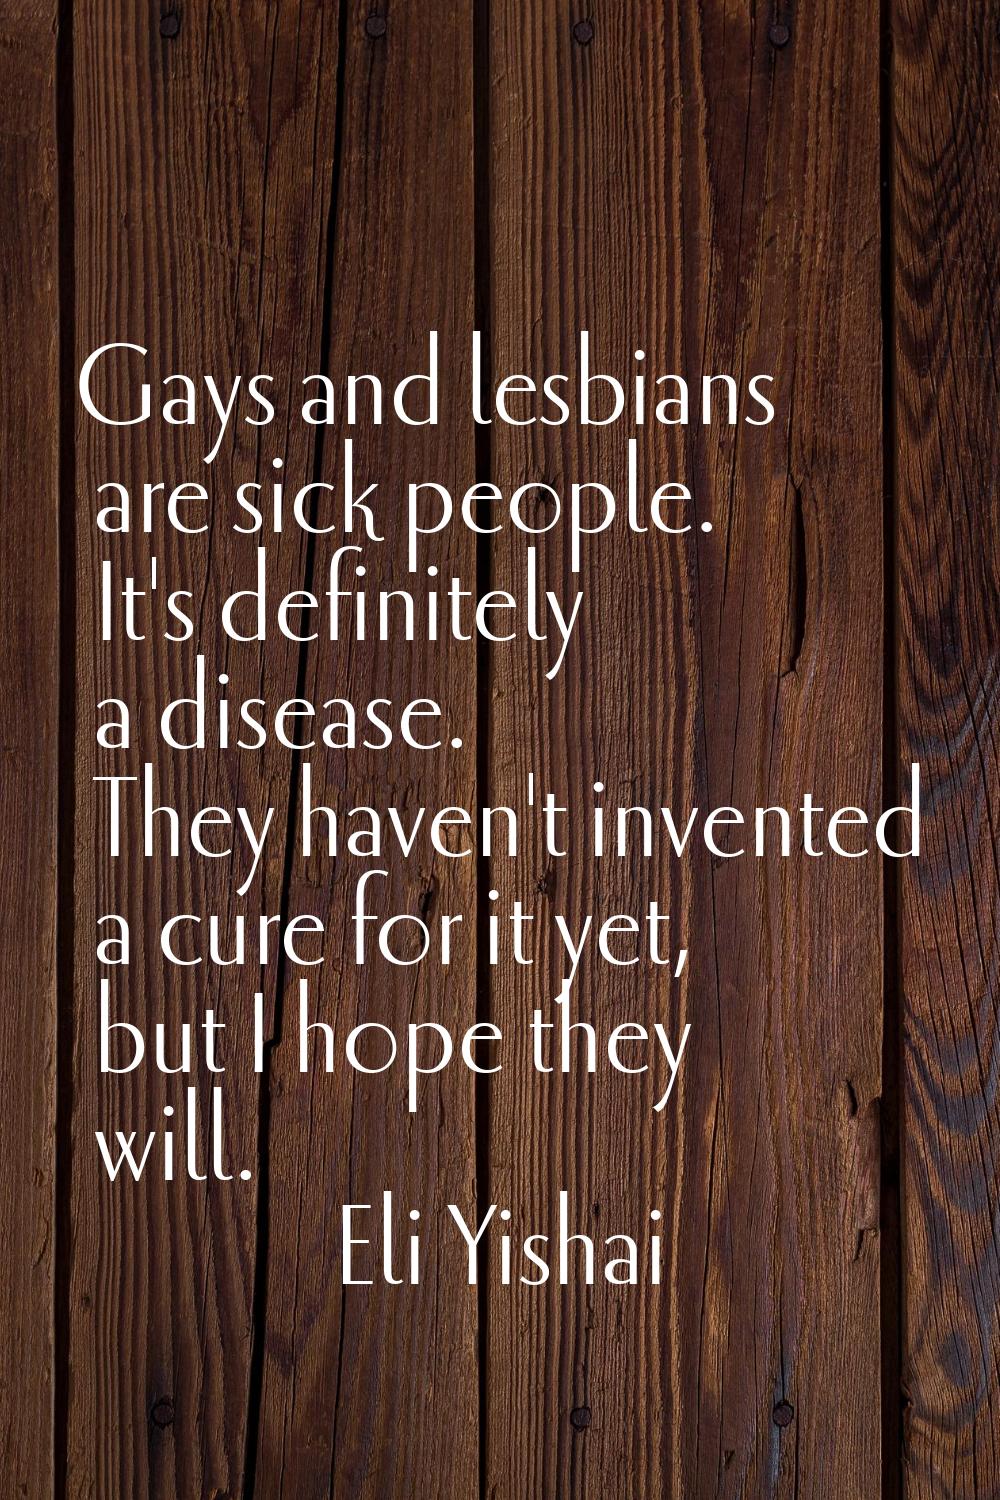 Gays and lesbians are sick people. It's definitely a disease. They haven't invented a cure for it y